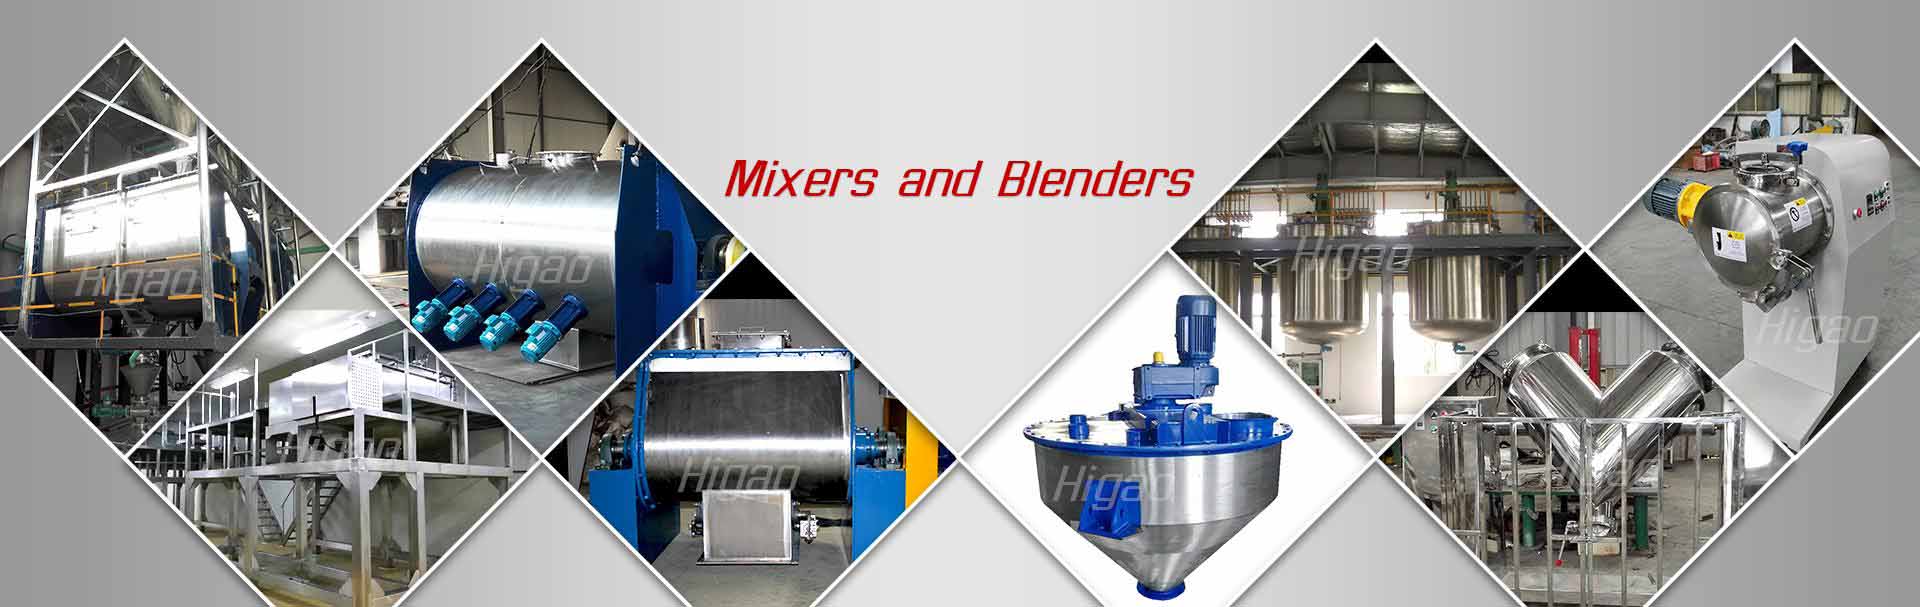 Mixers and Blenders manufacturer